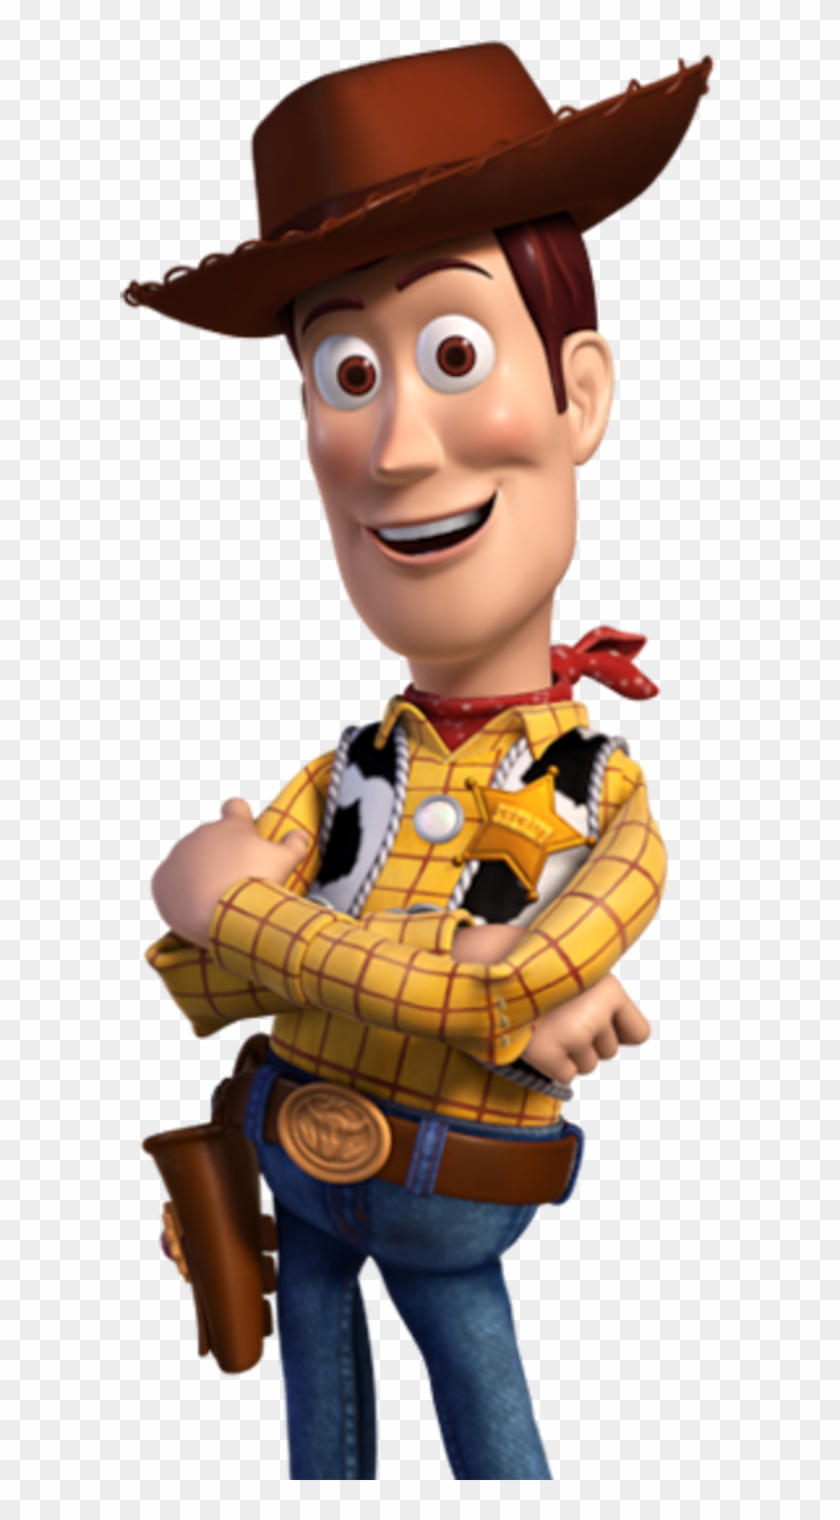 Forky Toy Story Png Transparent